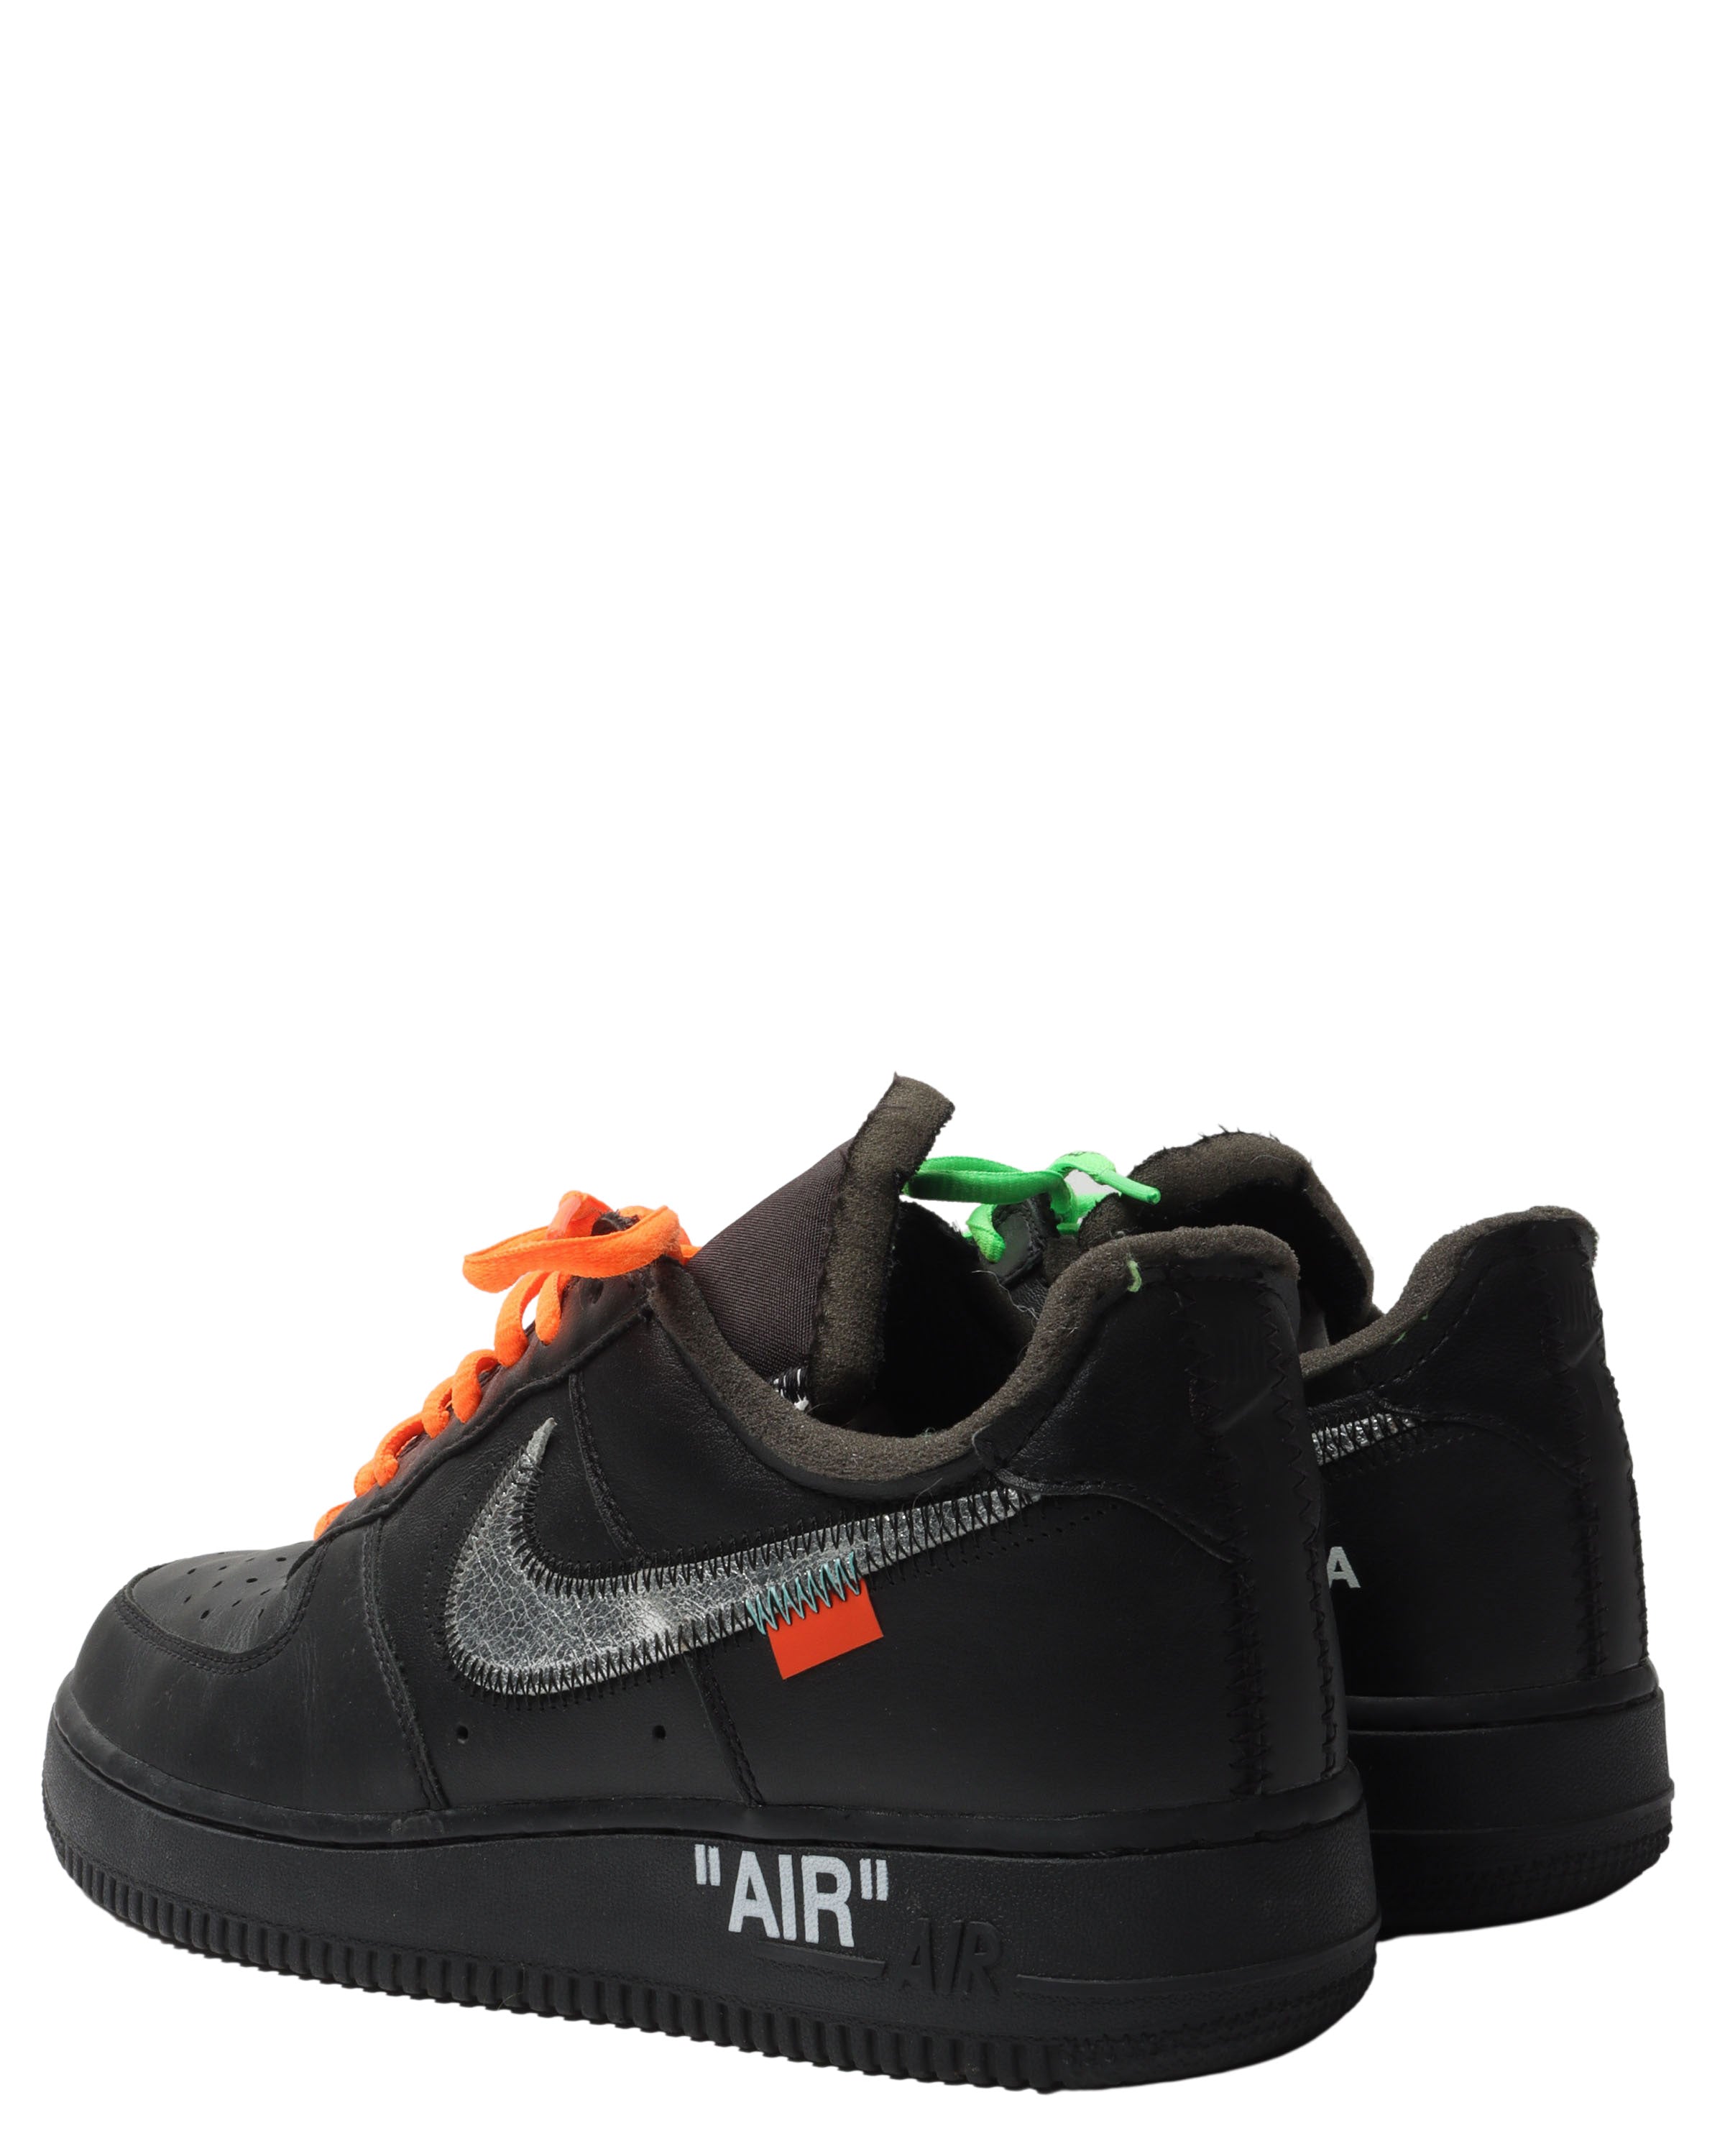 Off-White MOMA Air Force 1